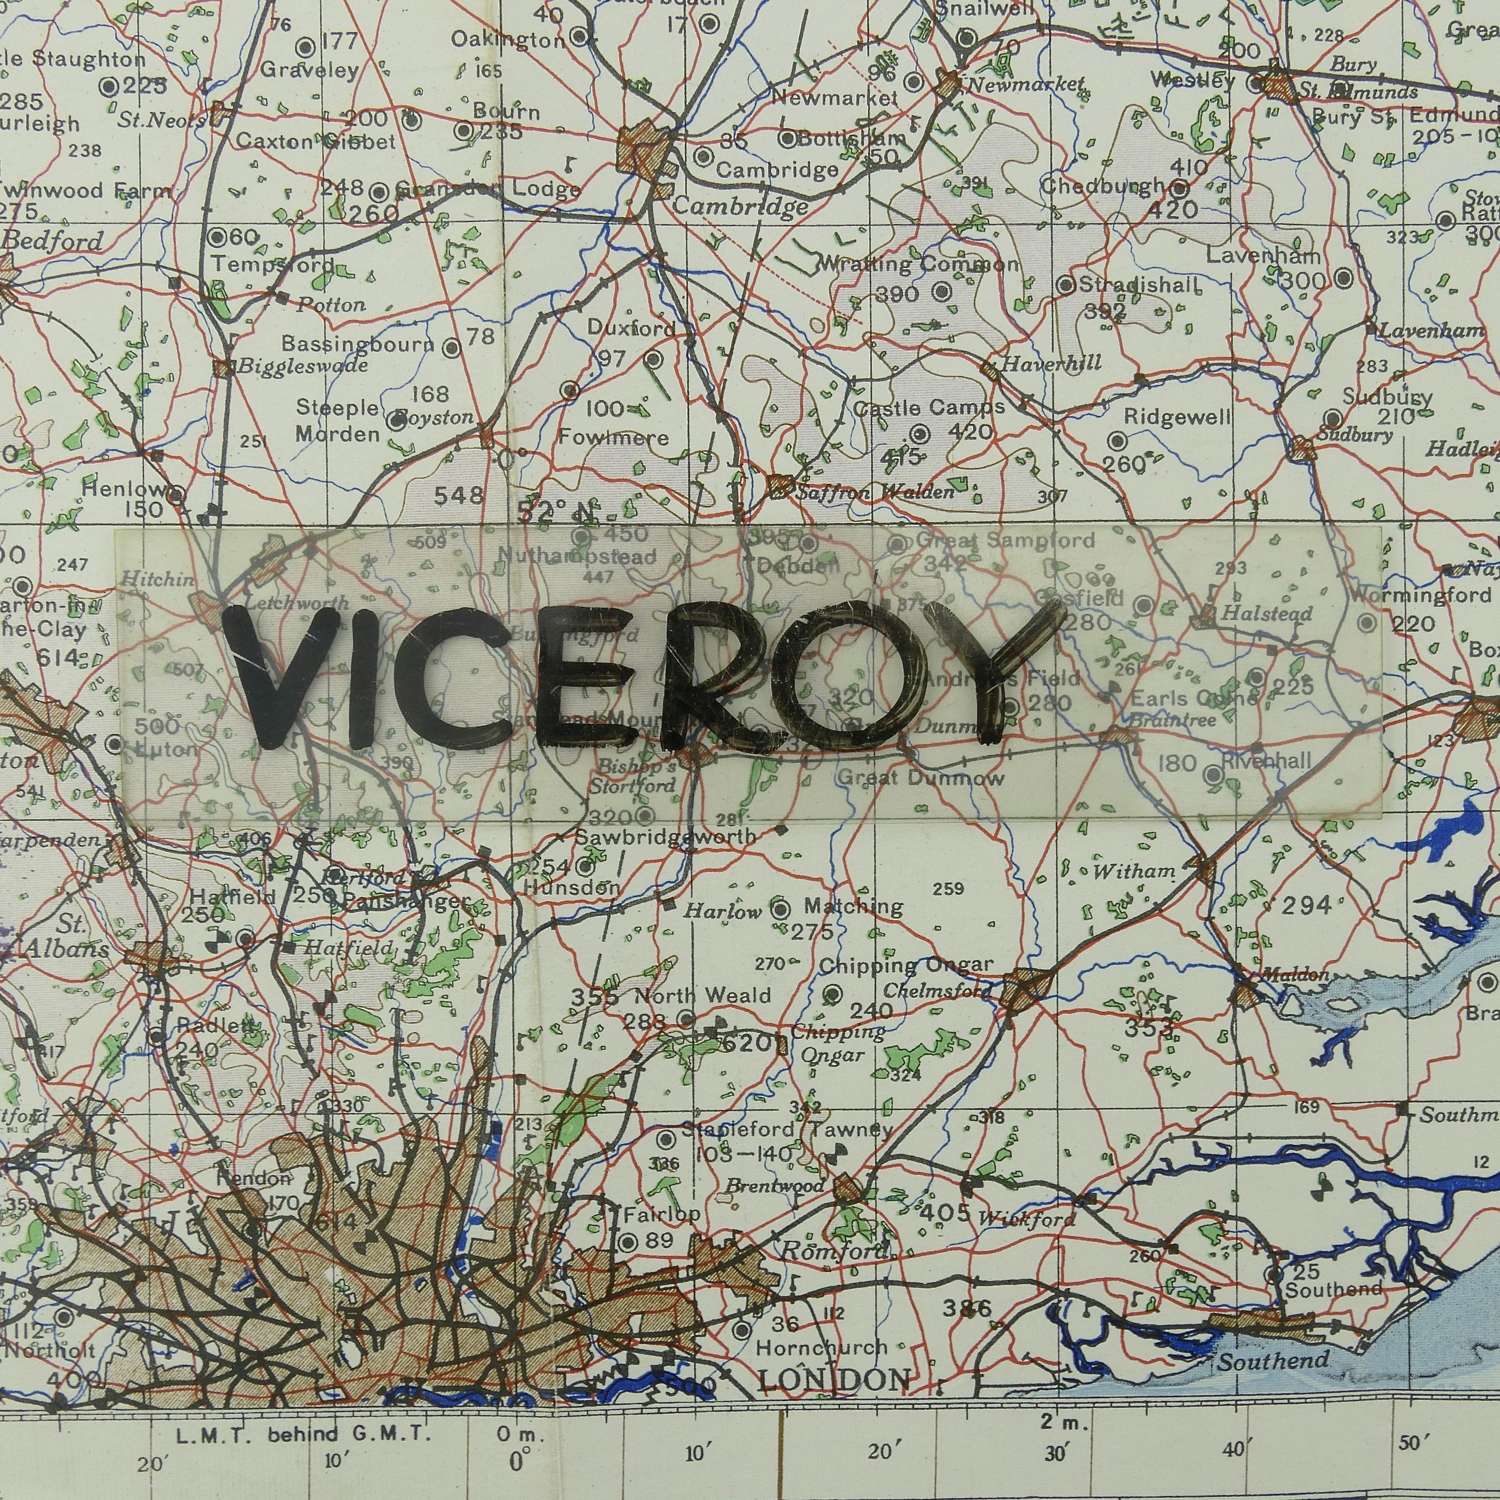 RAF Operations room plaque, 'VICEROY'